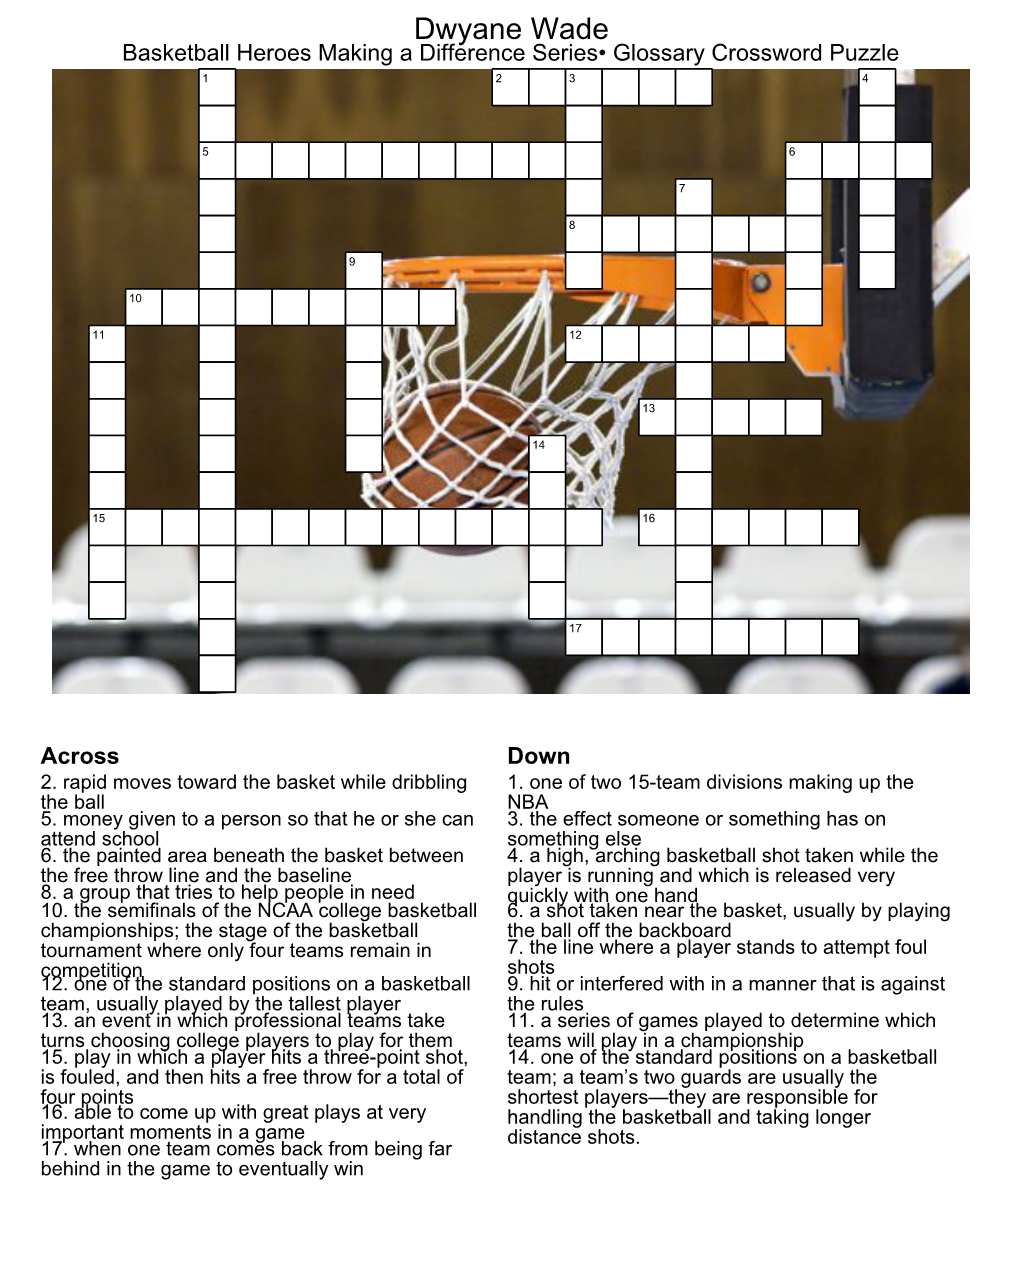 Dwyane Wade Basketball Heroes Making a Difference Series¥ Glossary Crossword Puzzle 1 2 3 4